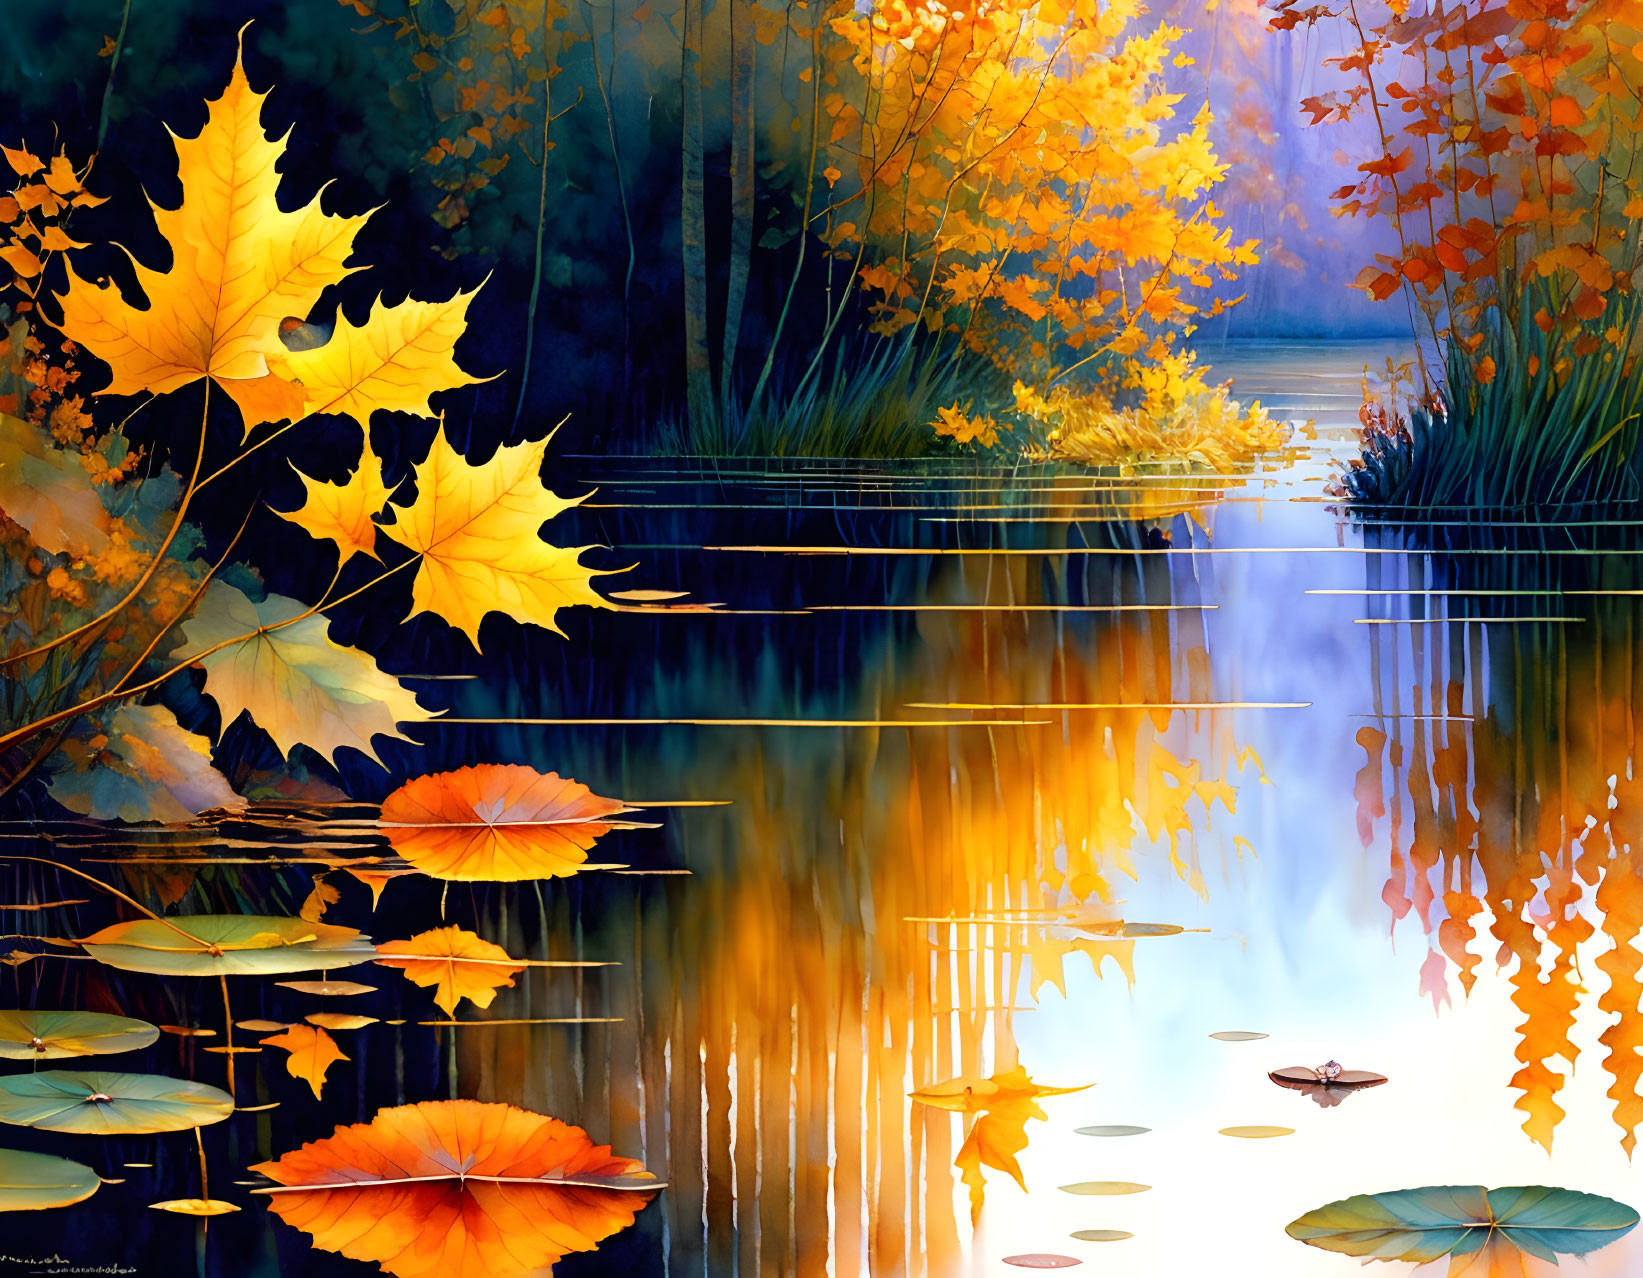 Tranquil autumn landscape with golden leaves, water reflections, lily pads, and forested backdrop